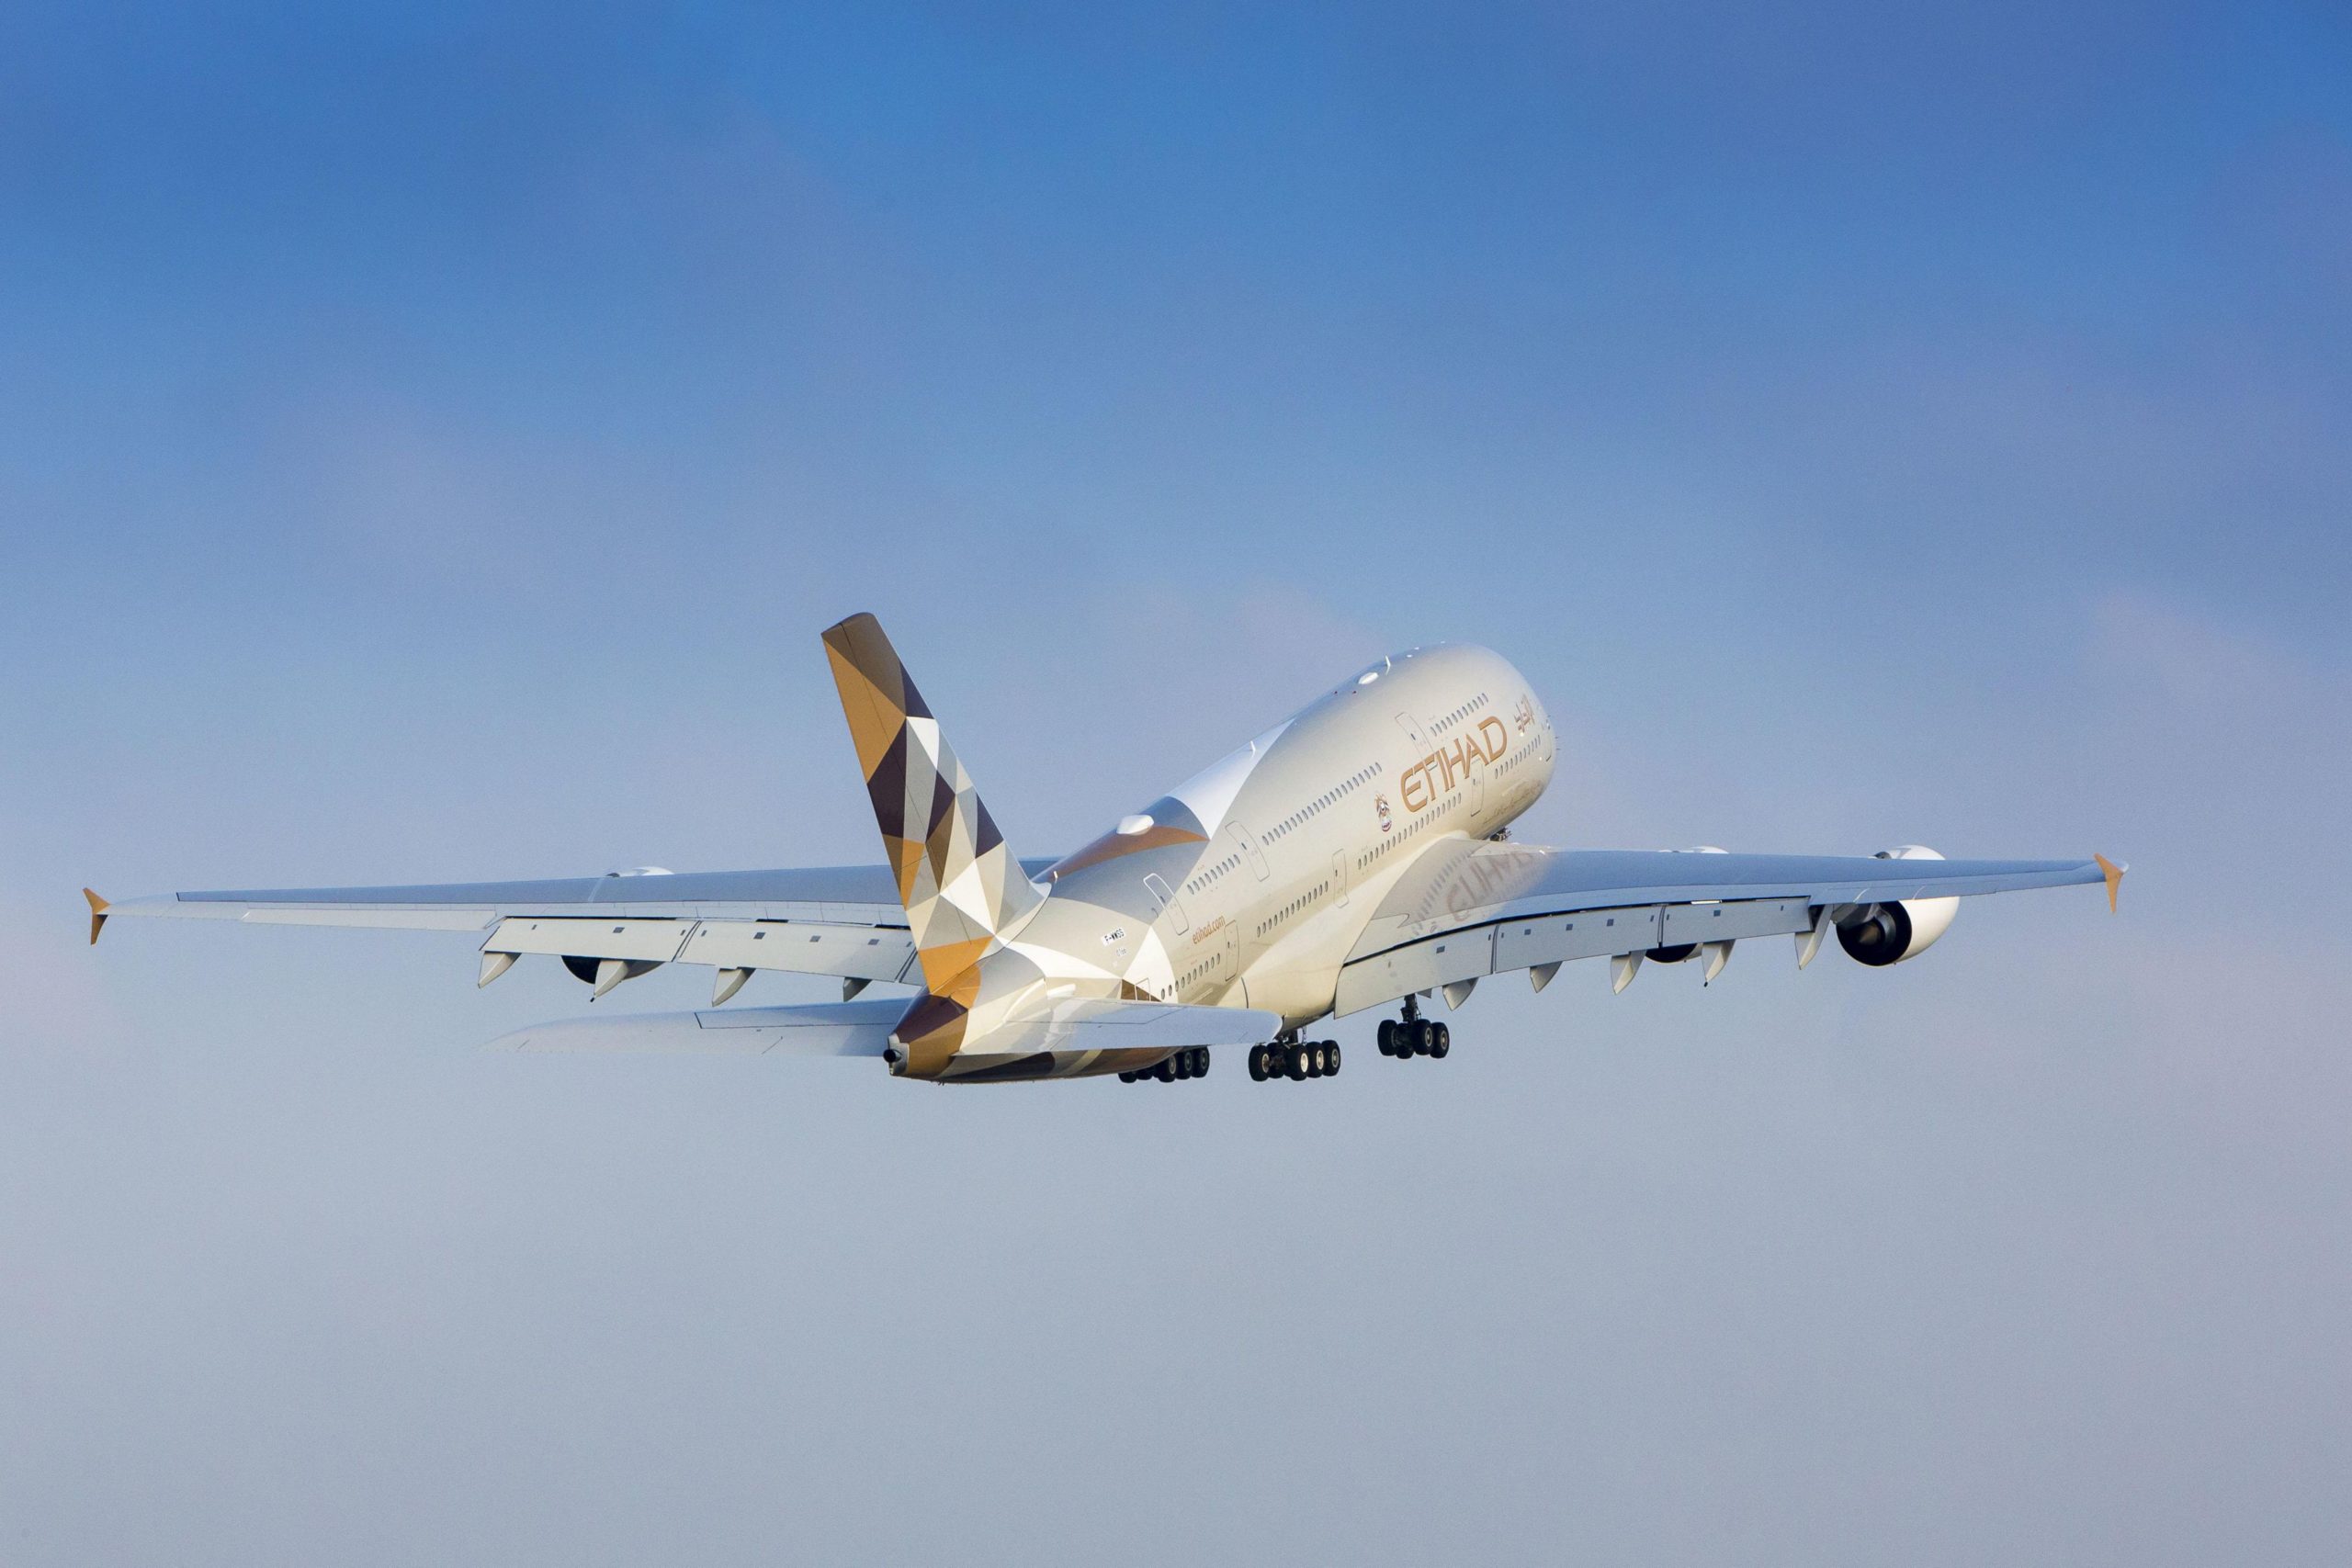 The first A380 was delivered to Etihad in 2014